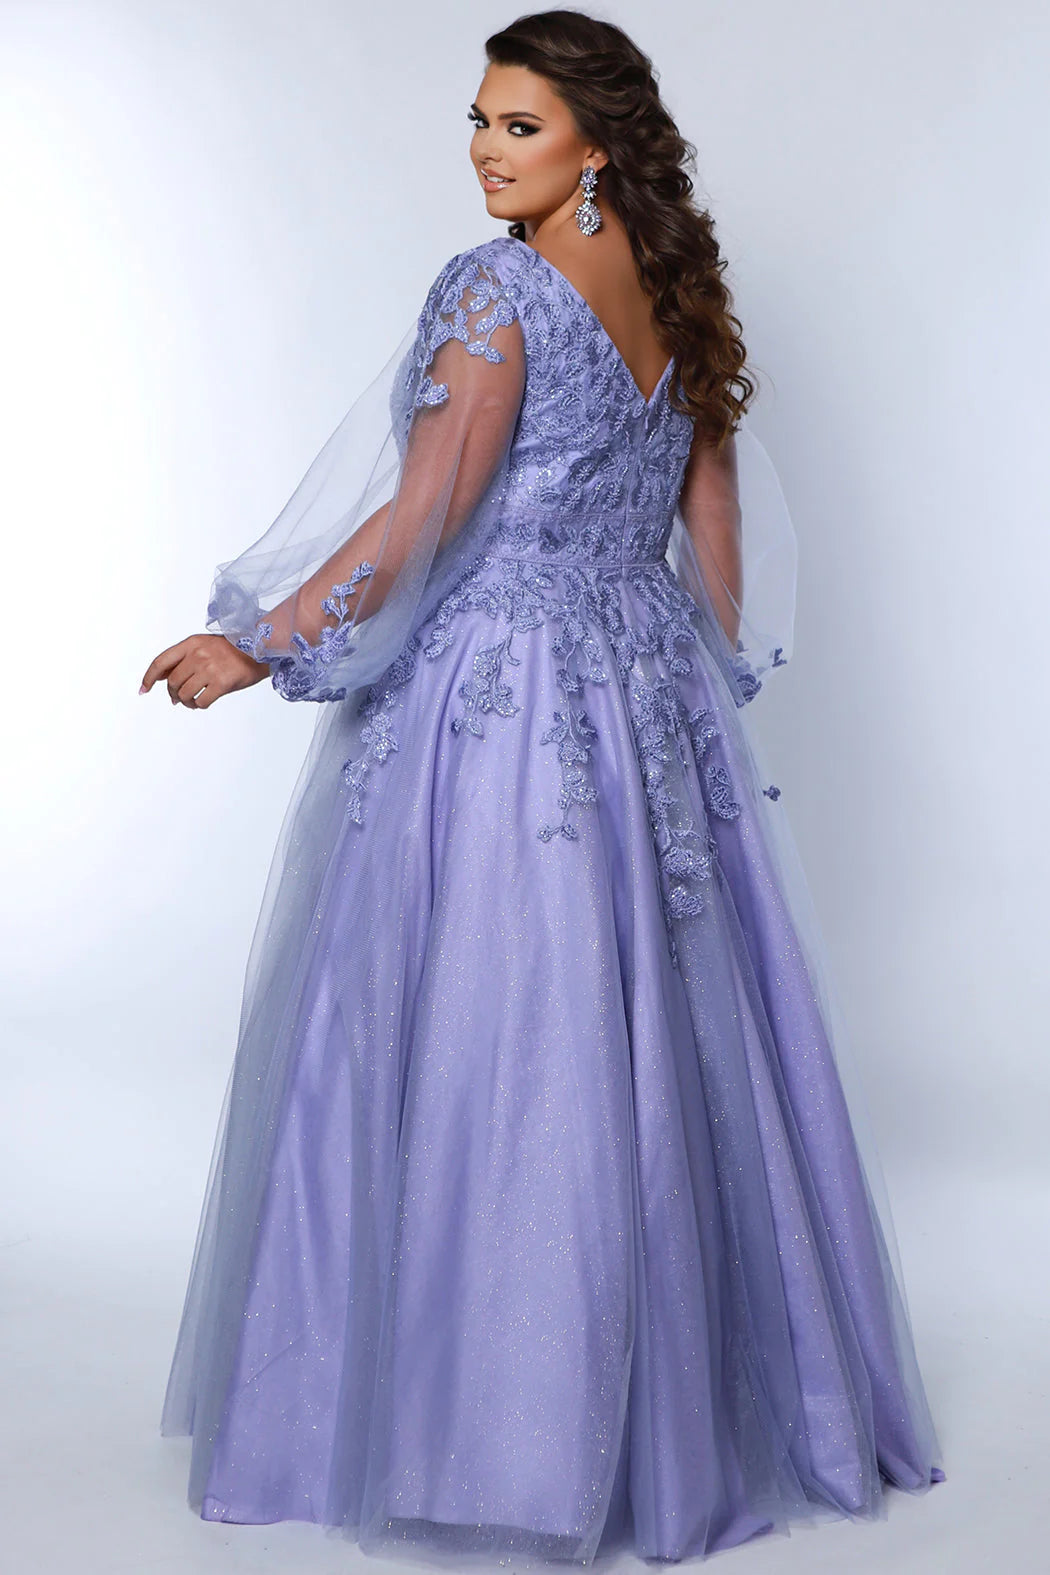 Turn heads in Sydneys Closet SC7373 Long Prom Dress. The sequin and plus size puff sleeves make this A-Line formal gown remarkably elegant, while the plush material provides maximum comfort for your special night. Make a statement with this beautiful dress. You will look pretty fancy at Prom 2024 or any special event when you opt to wear this plus size formal dress with sleeves.